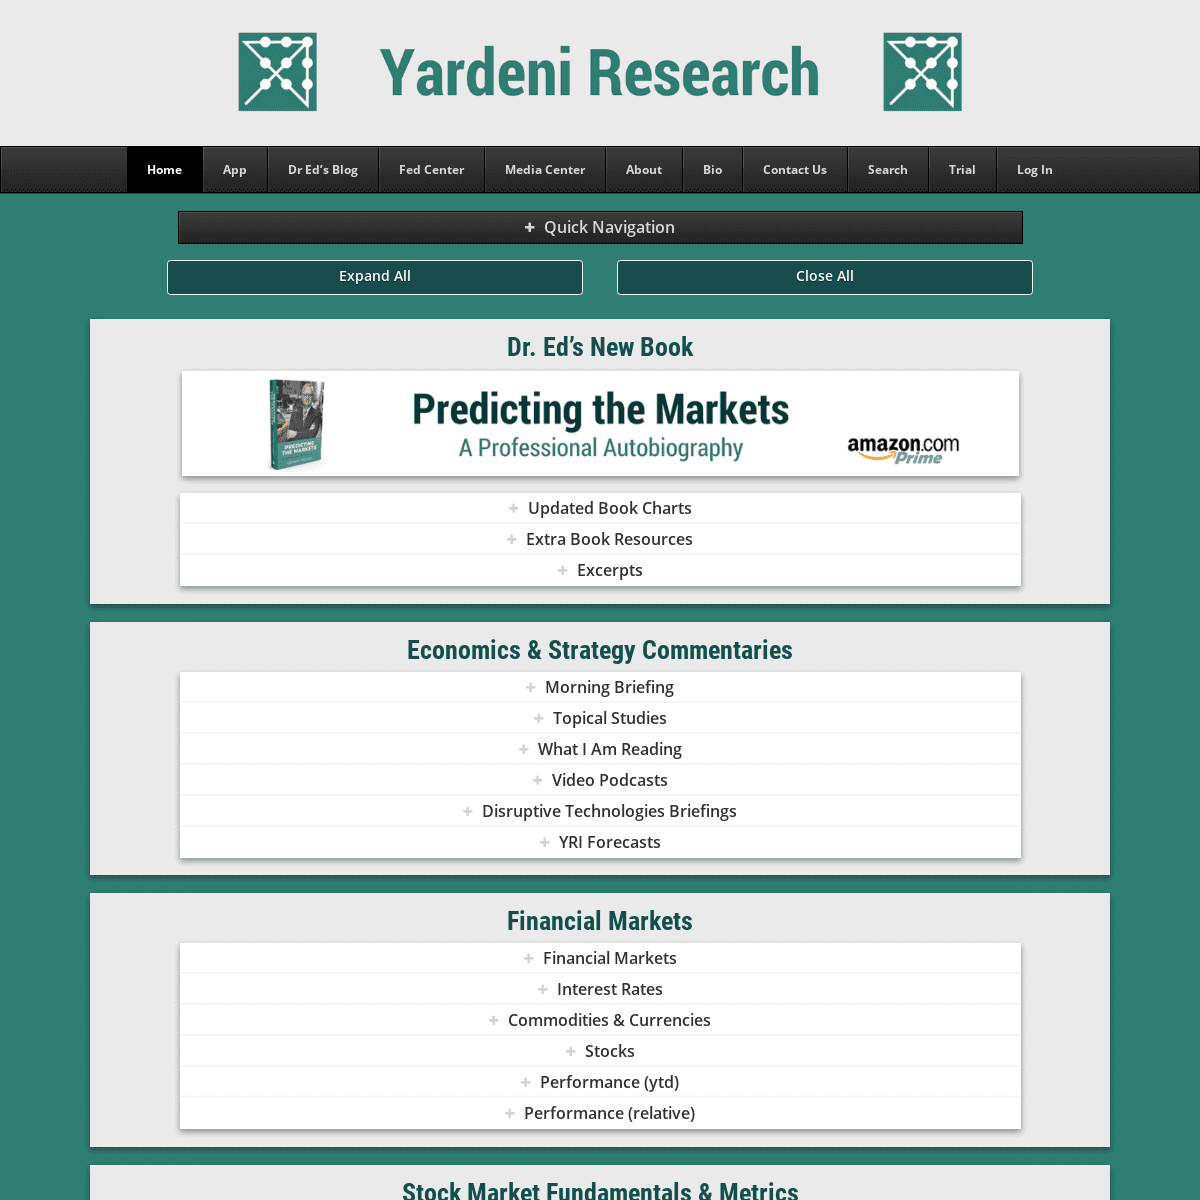 A complete backup of https://yardeni.com